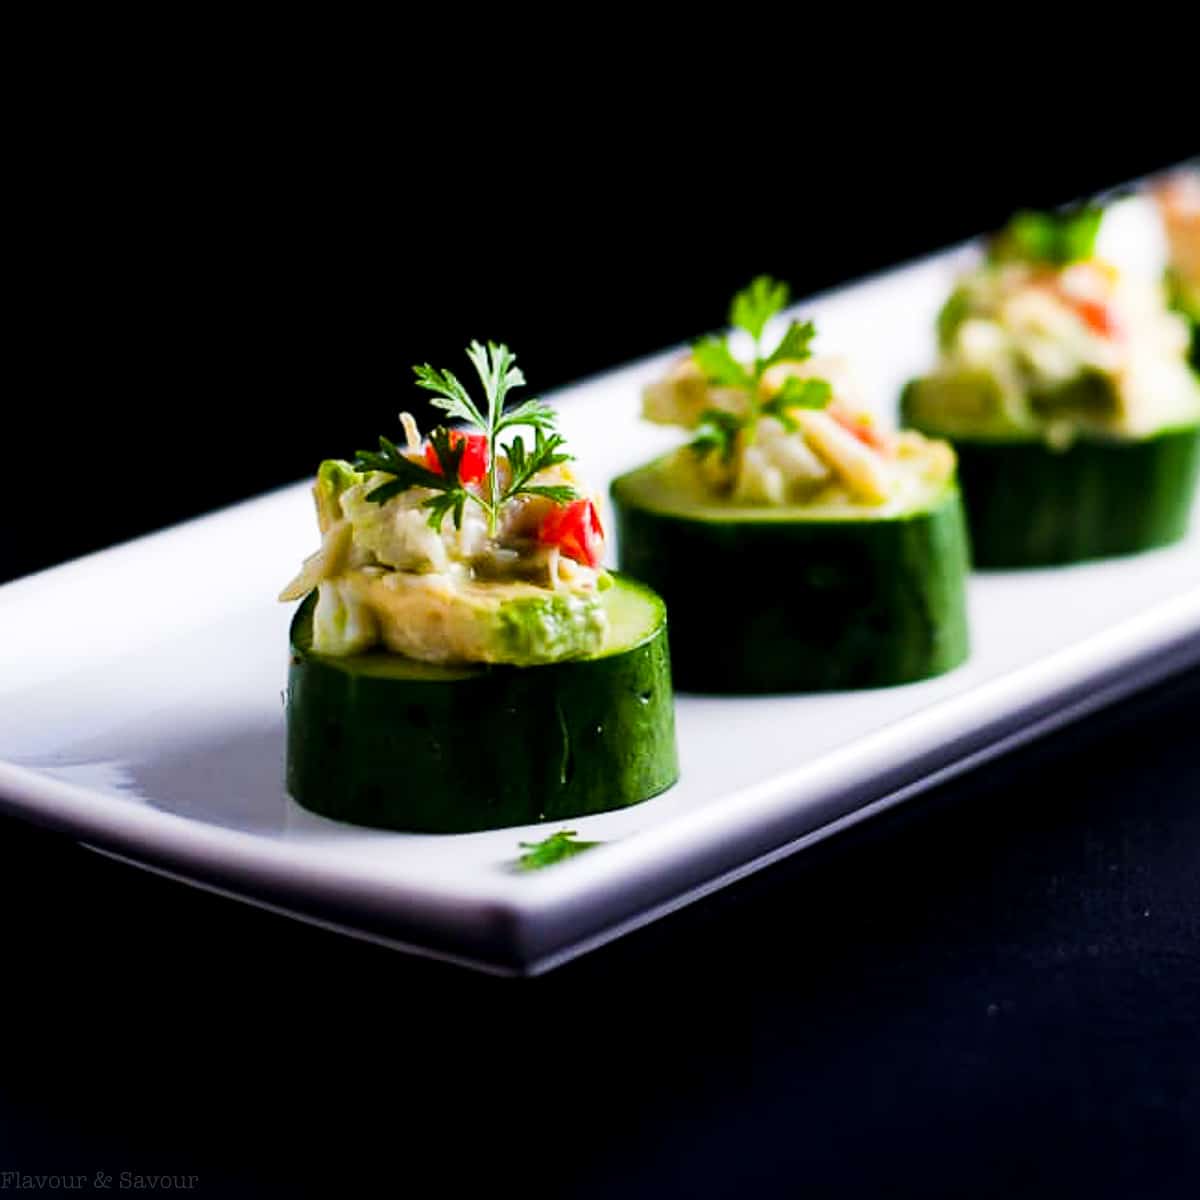 Crab stuffed cucumber cups garnished with cilantro leaves.